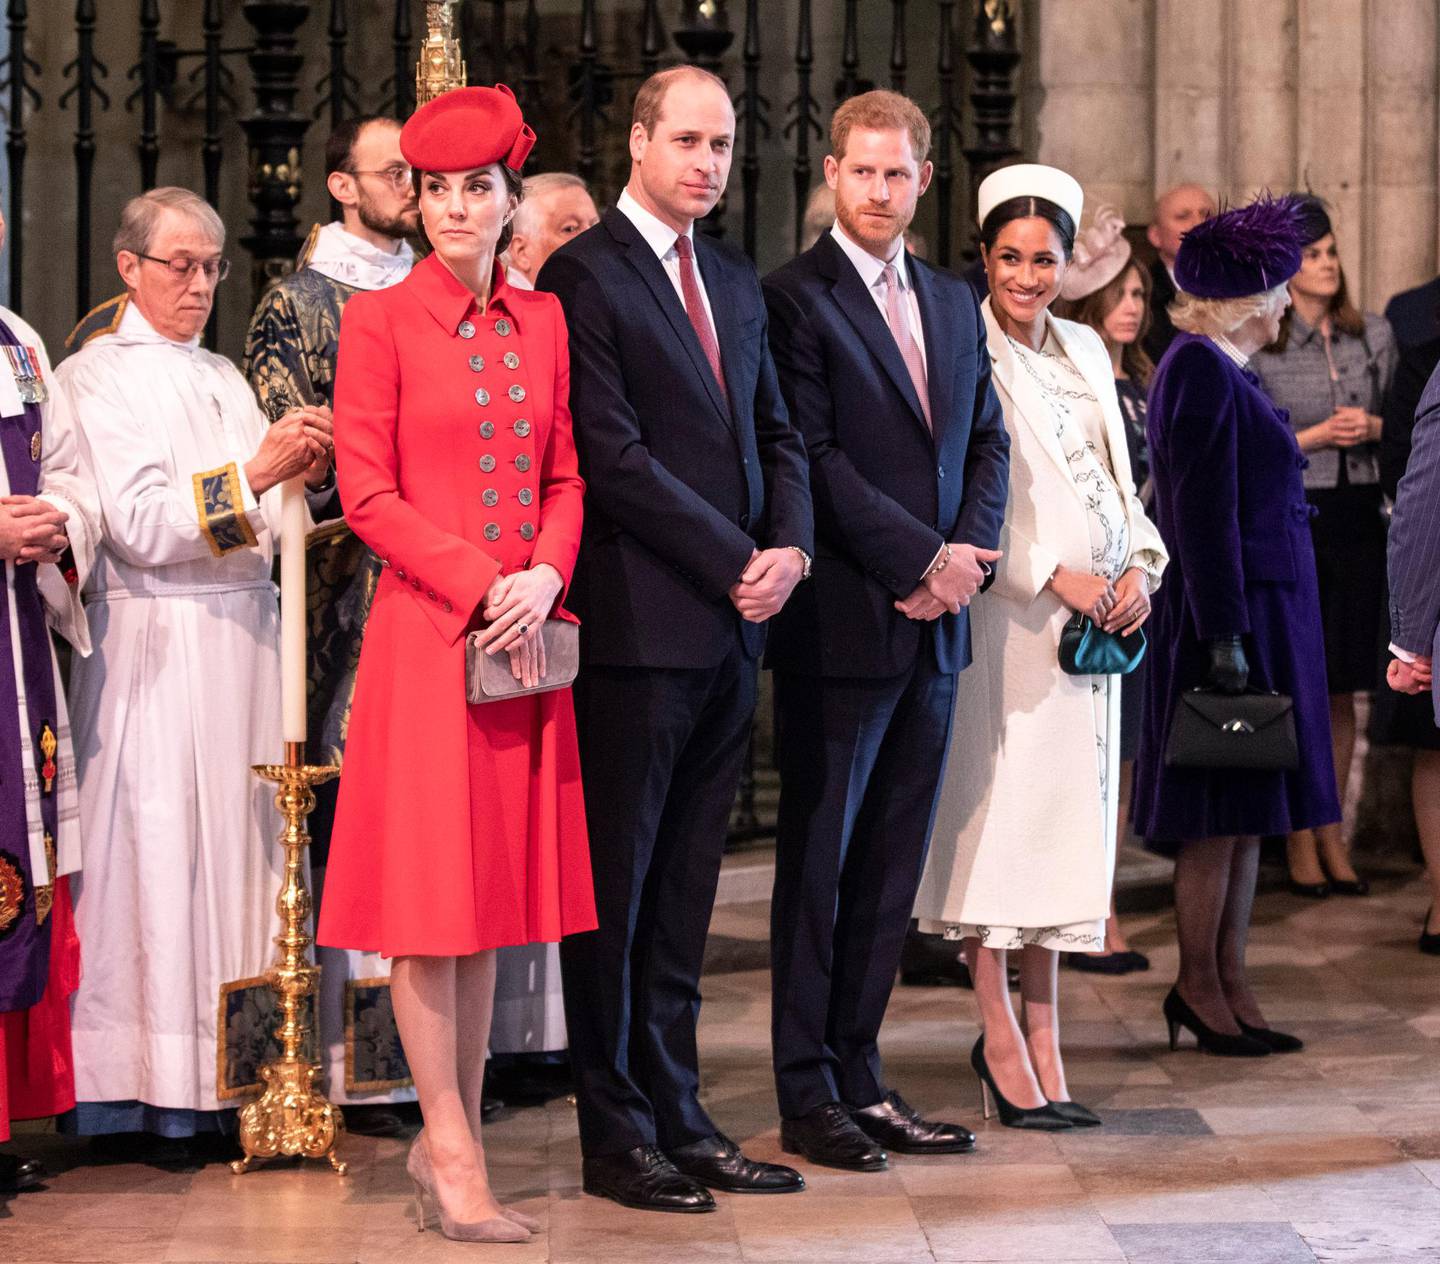 From left, Britain's Kate, the Duchess of Cambridge, Prince William, Prince Harry and Meghan, the Duchess of Sussex attend the Commonwealth Service with other members of the Royal family at Westminster Abbey in London, Monday, March 11, 2019. Commonwealth Day has a special significance this year, as 2019 marks the 70th anniversary of the modern Commonwealth - a global network of 53 countries and almost 2.4 billion people, a third of the world's population, of whom 60 percent are under 30 years old. (Richard Pohle/Pool Photo via AP)